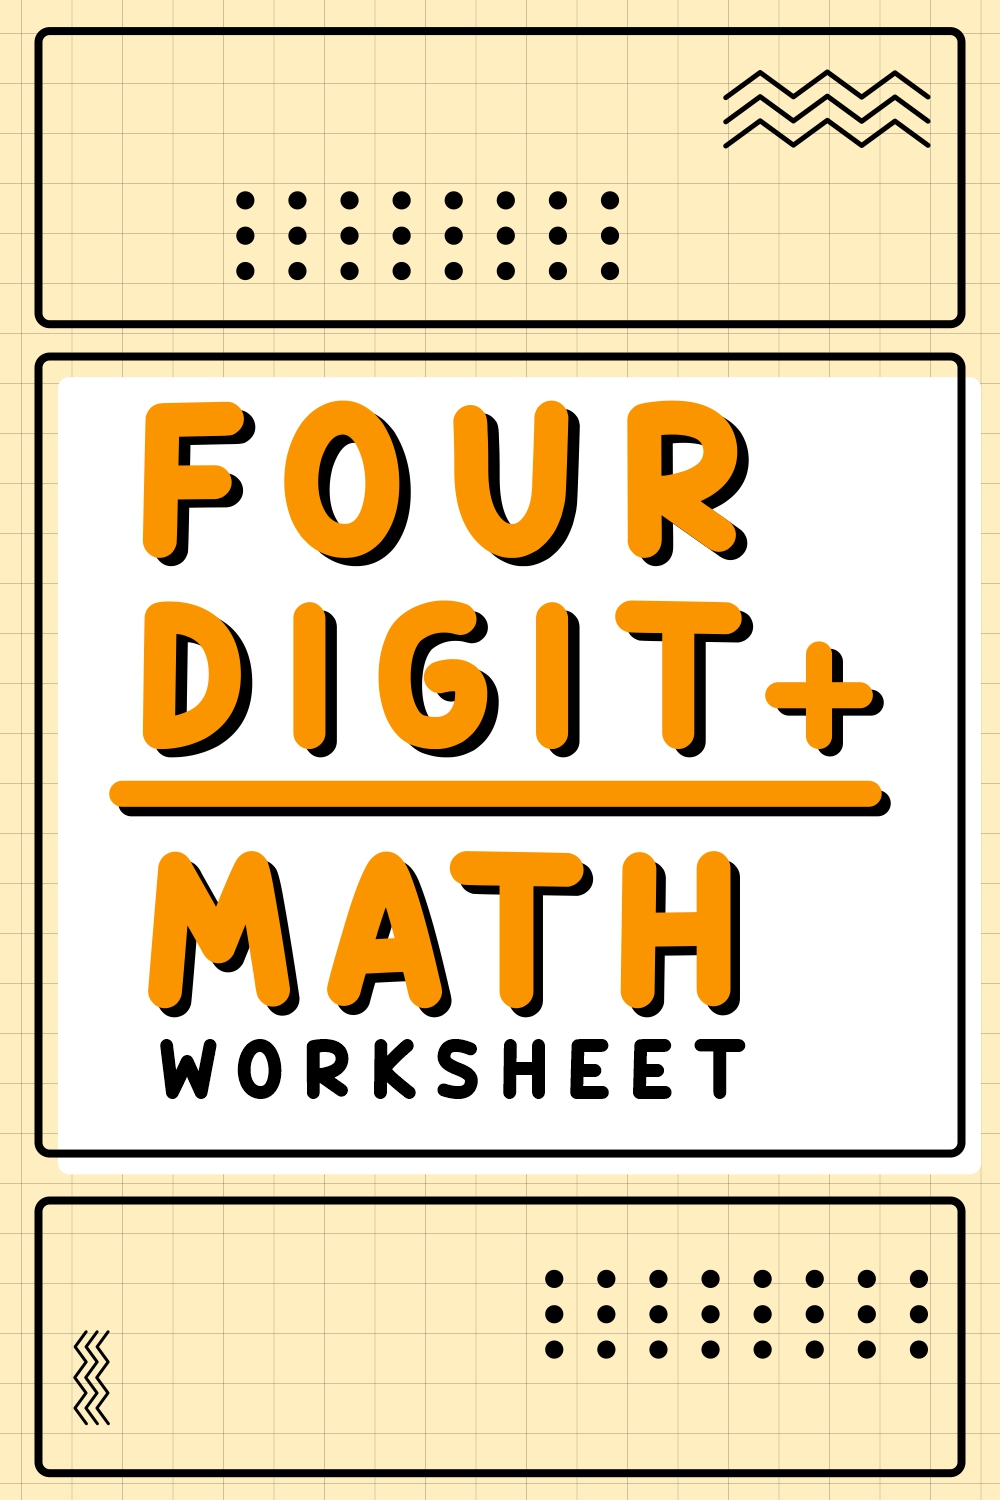 15 Images of Four- Digit Math Worksheets